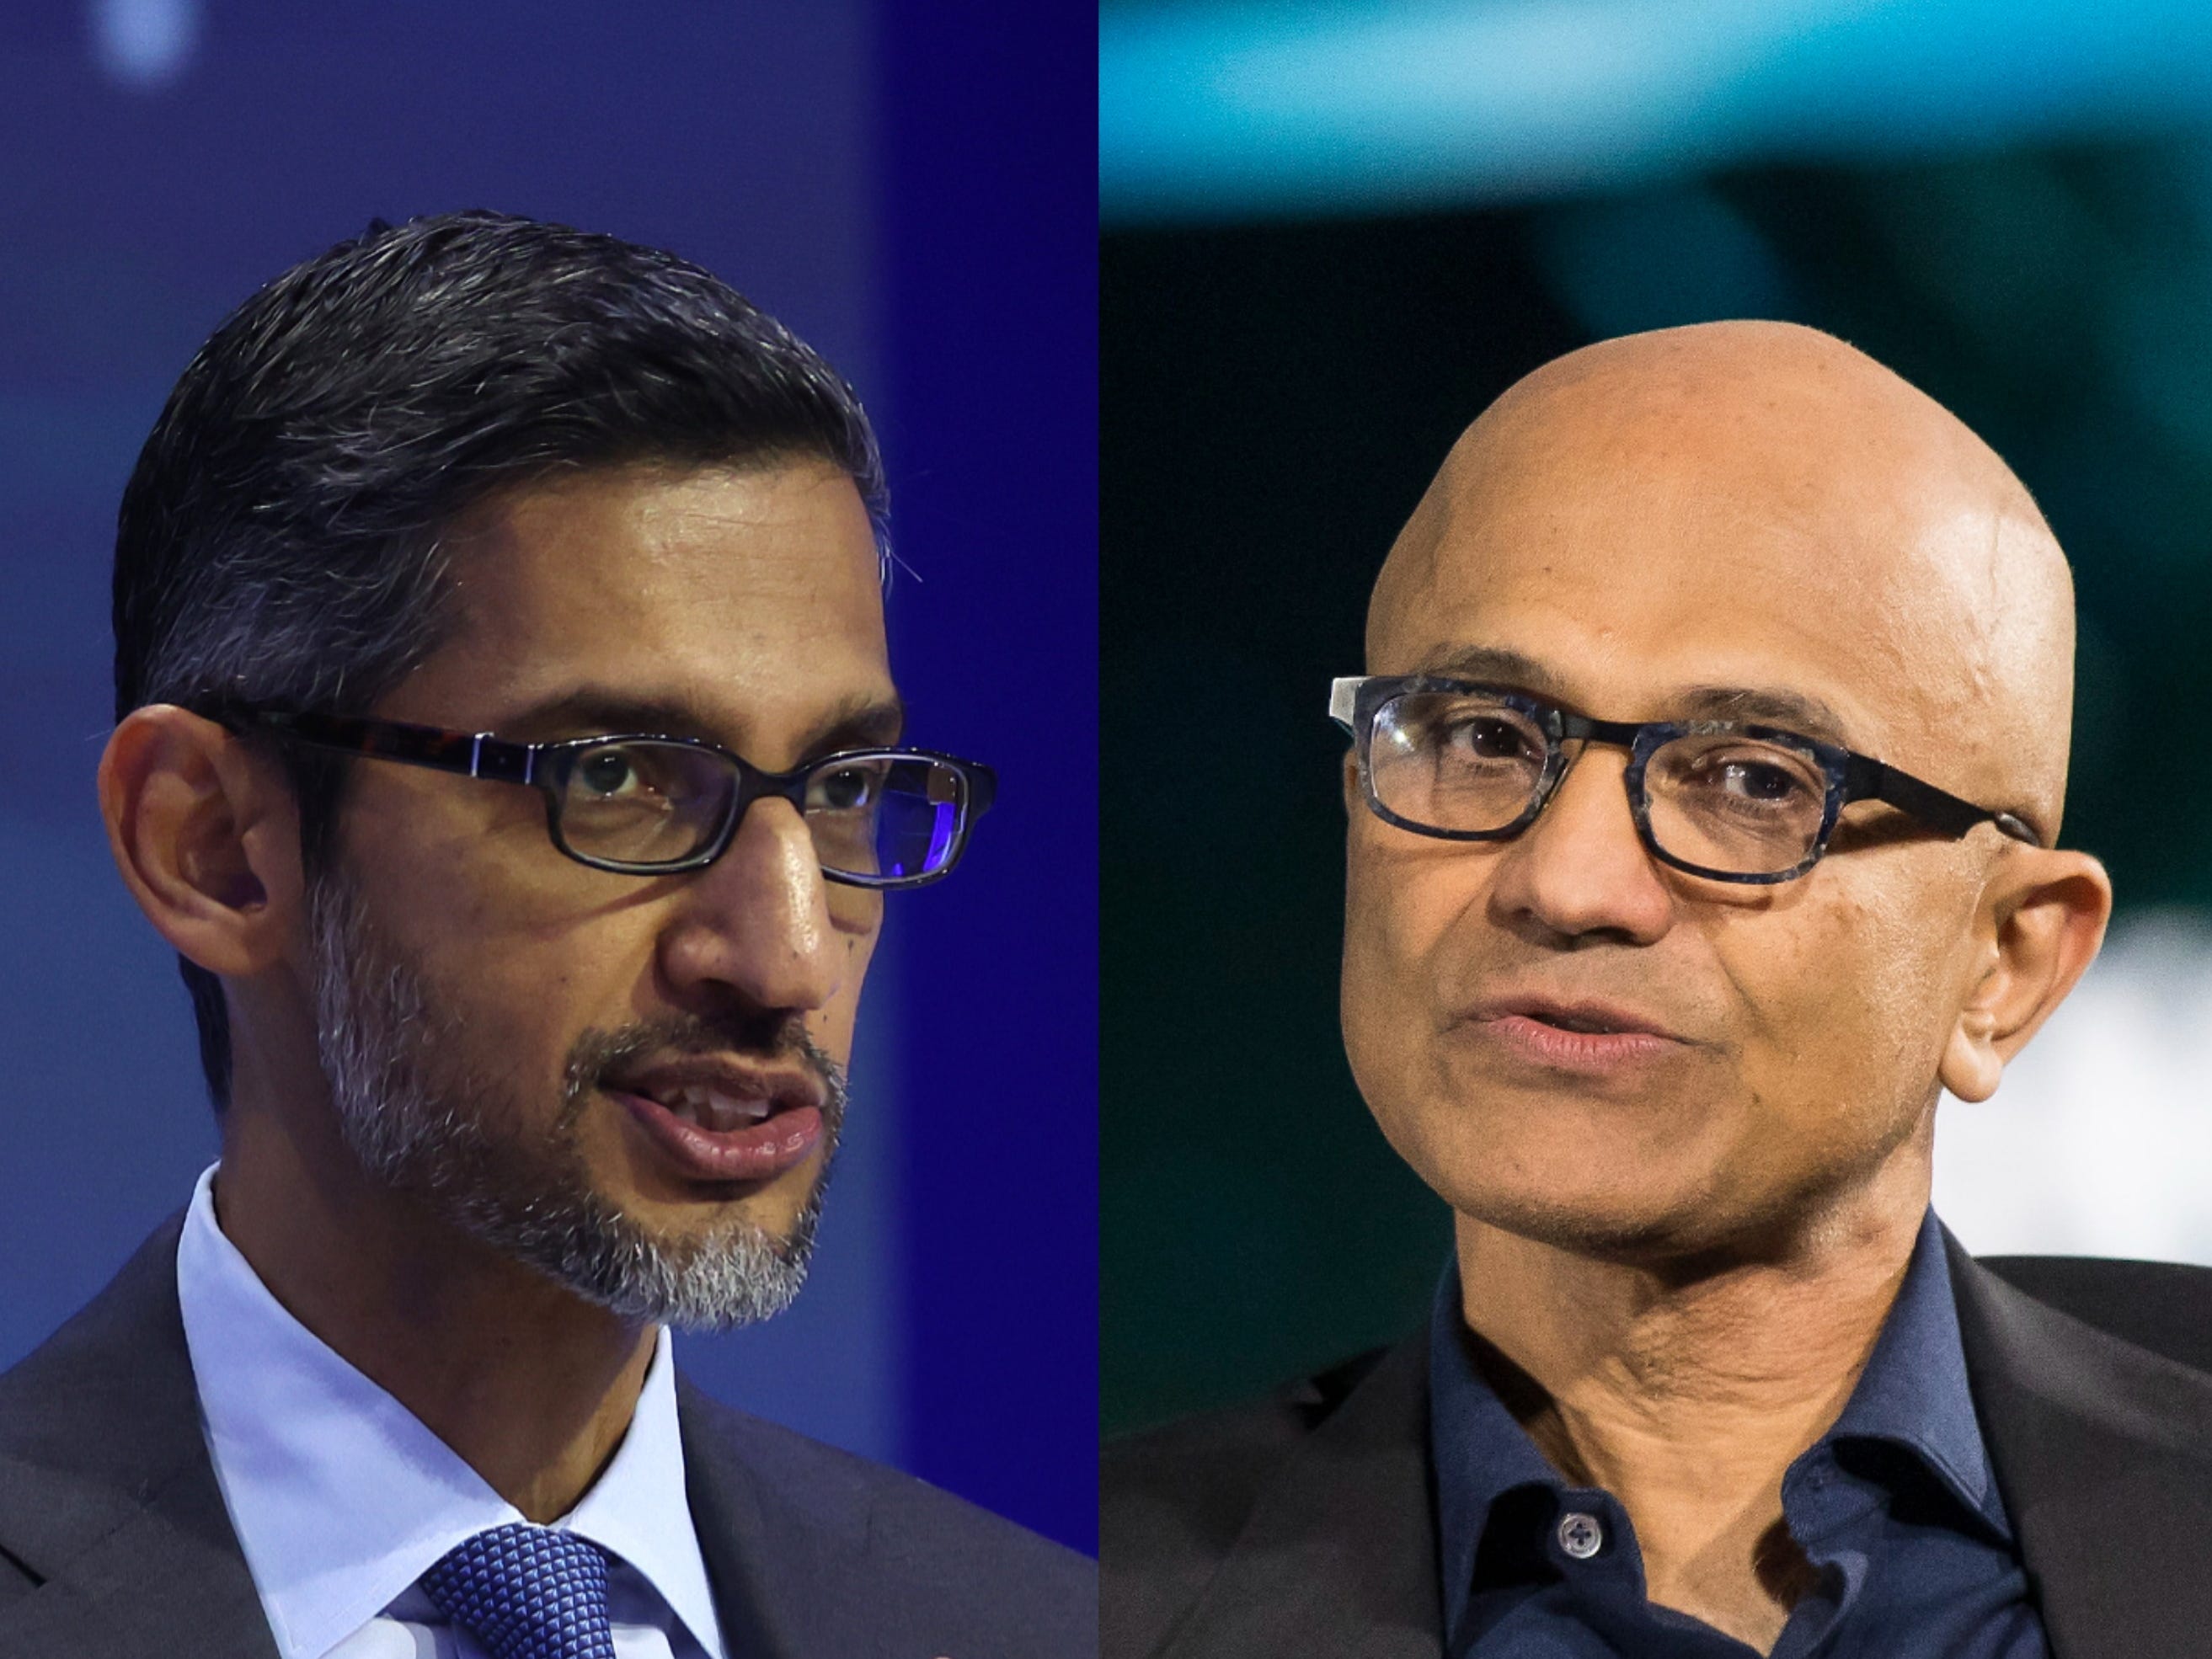 microsoft, android, sundar pichai claps back at microsoft's ceo after his comments about making google 'dance'